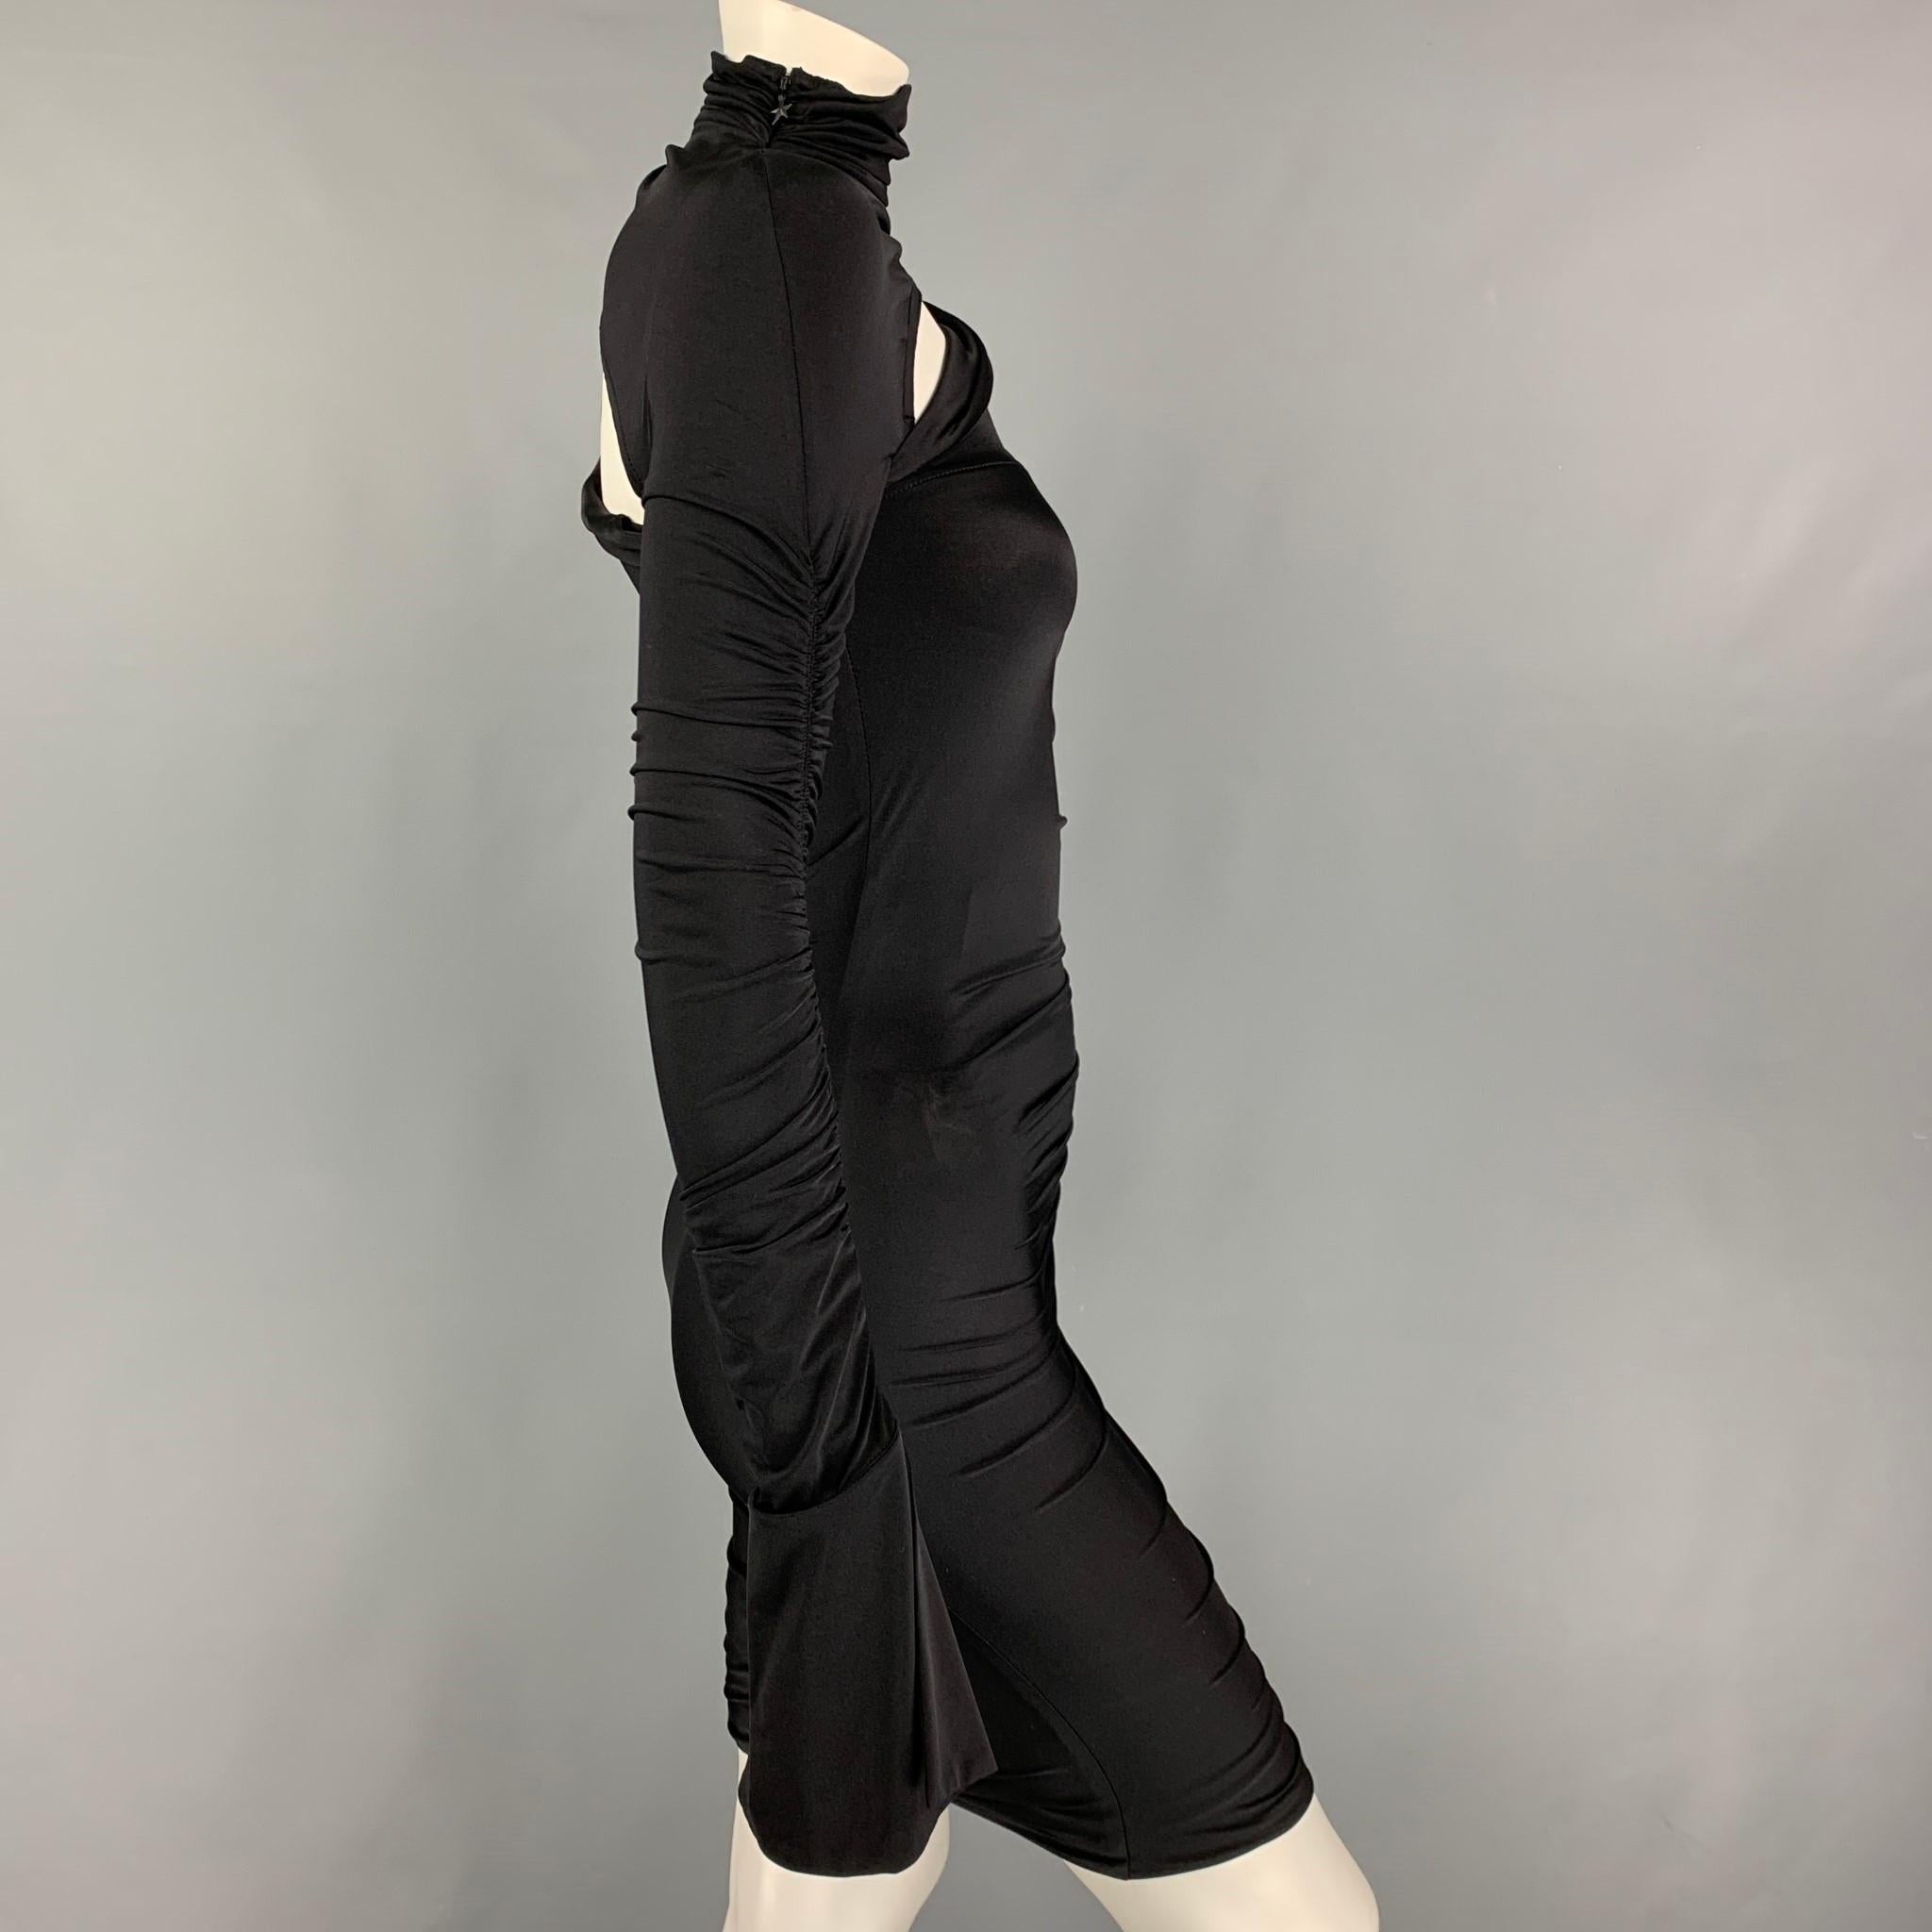 MUGLER dress comes in a black stretch polyamide / elastane material featuring an asymmetrical style, ruched design, long sleeves, cut-out detail, high collar, and a side zipper closure.

Excellent Pre-Owned Condition.
Marked: 34
Original Retail